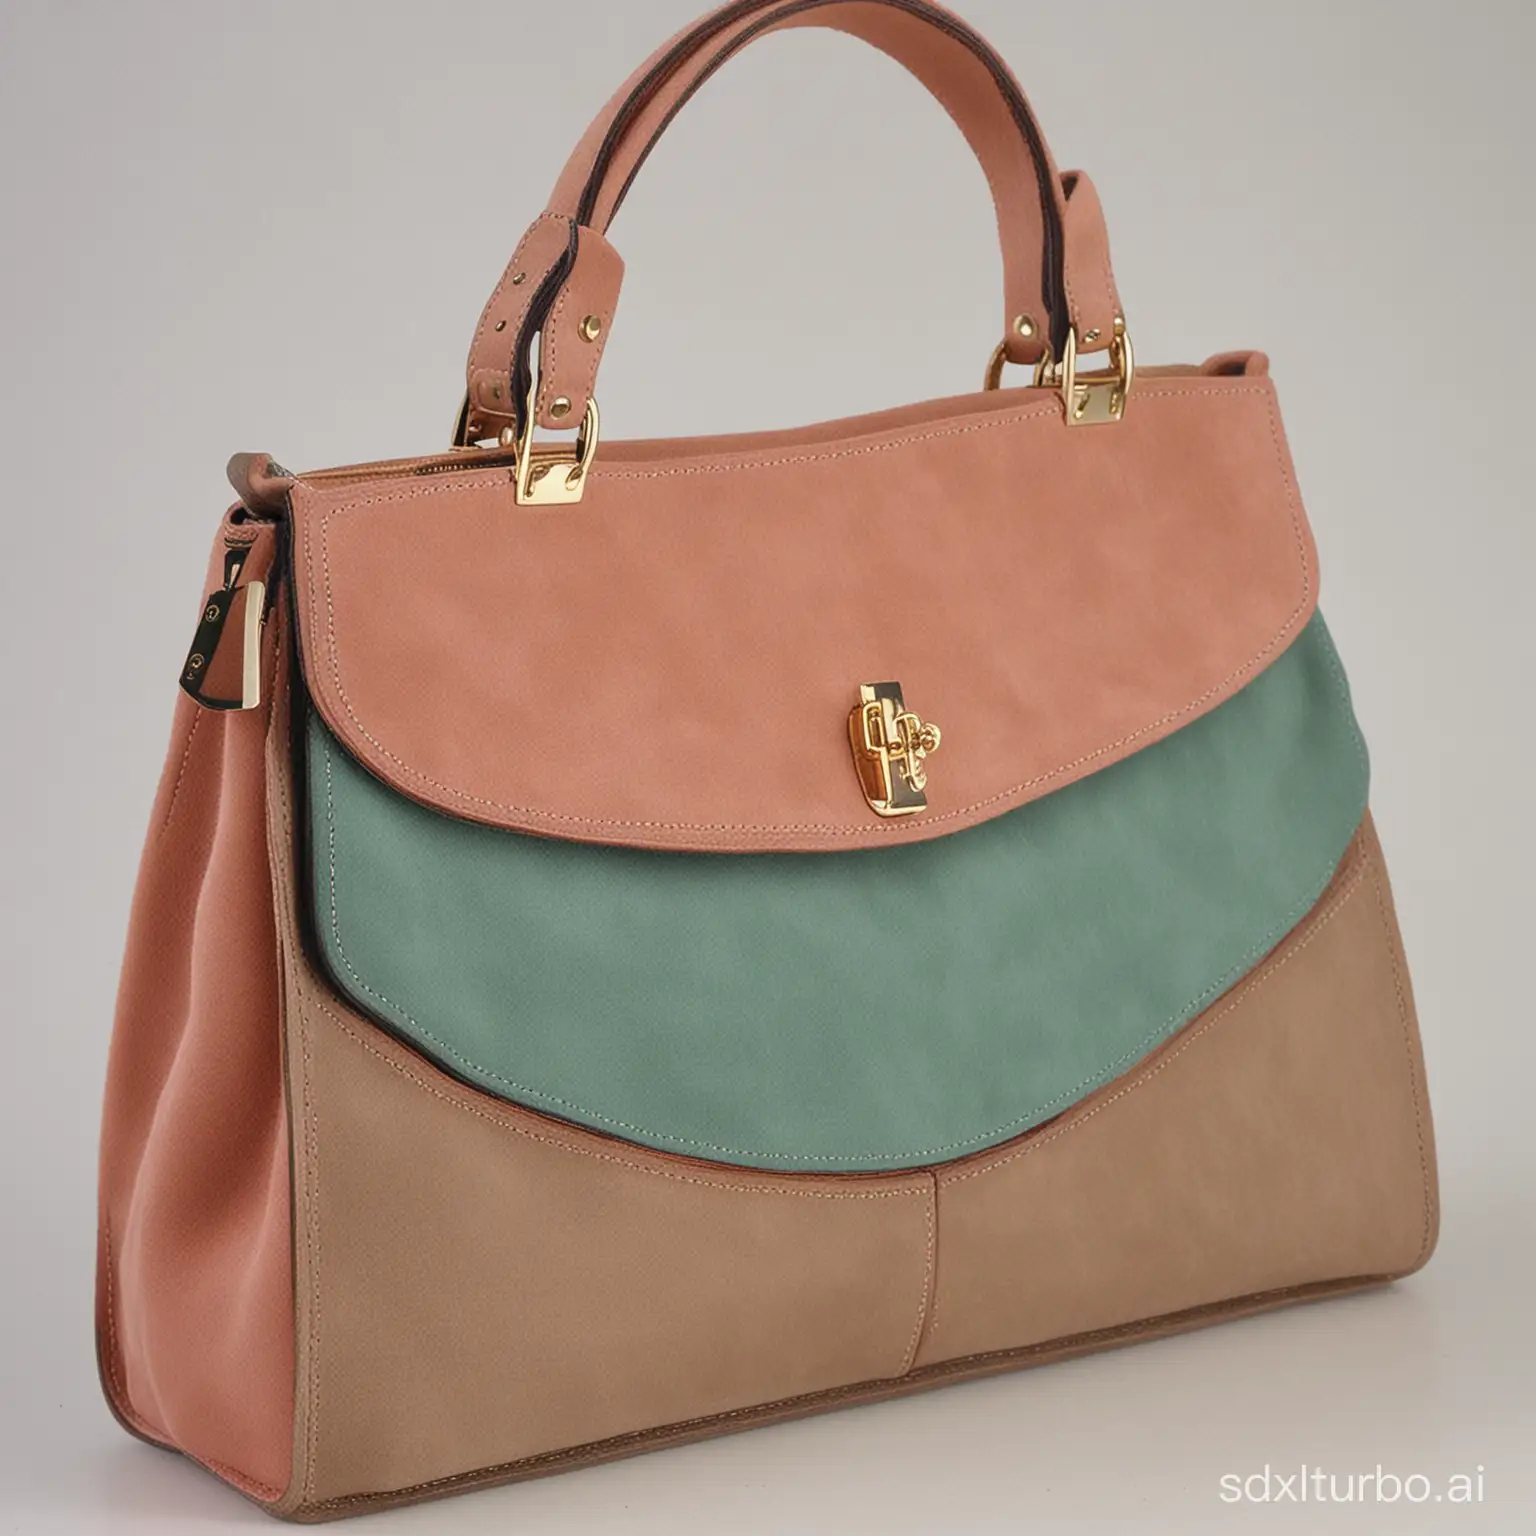 Stylish-Suede-Leather-Designer-Purse-in-Vibrant-Colors